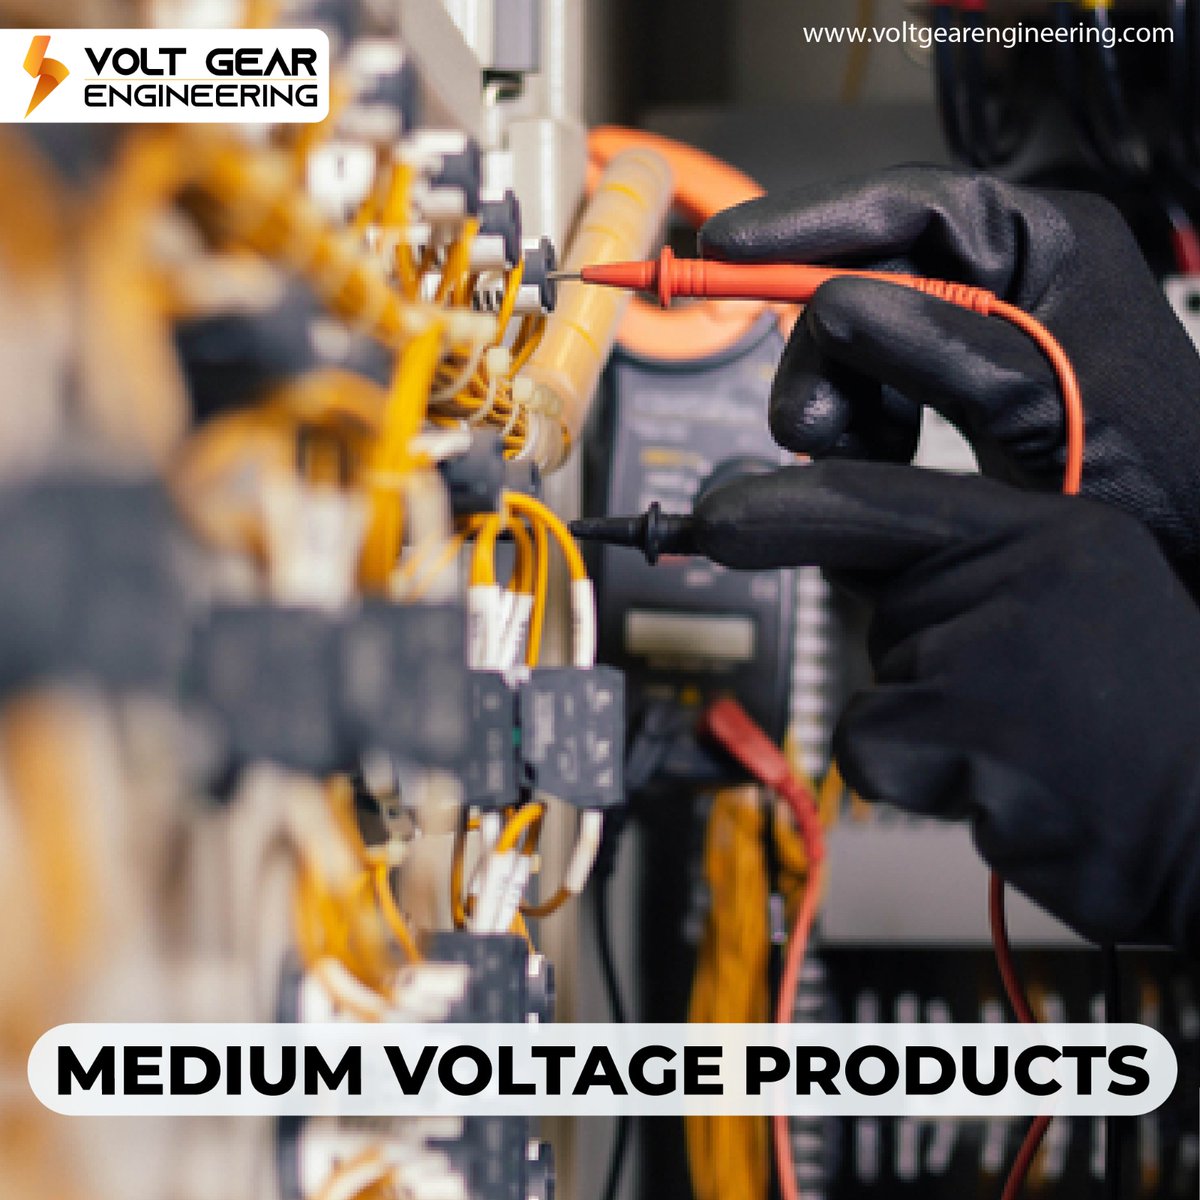 Power up your business with our reliable and efficient medium voltage products!  From robust switchgears to intelligent protection devices, our range of medium voltage solutions ensures a safe and stable power distribution. 
#mediumvoltageproducts #voltgearengineering #Insulators